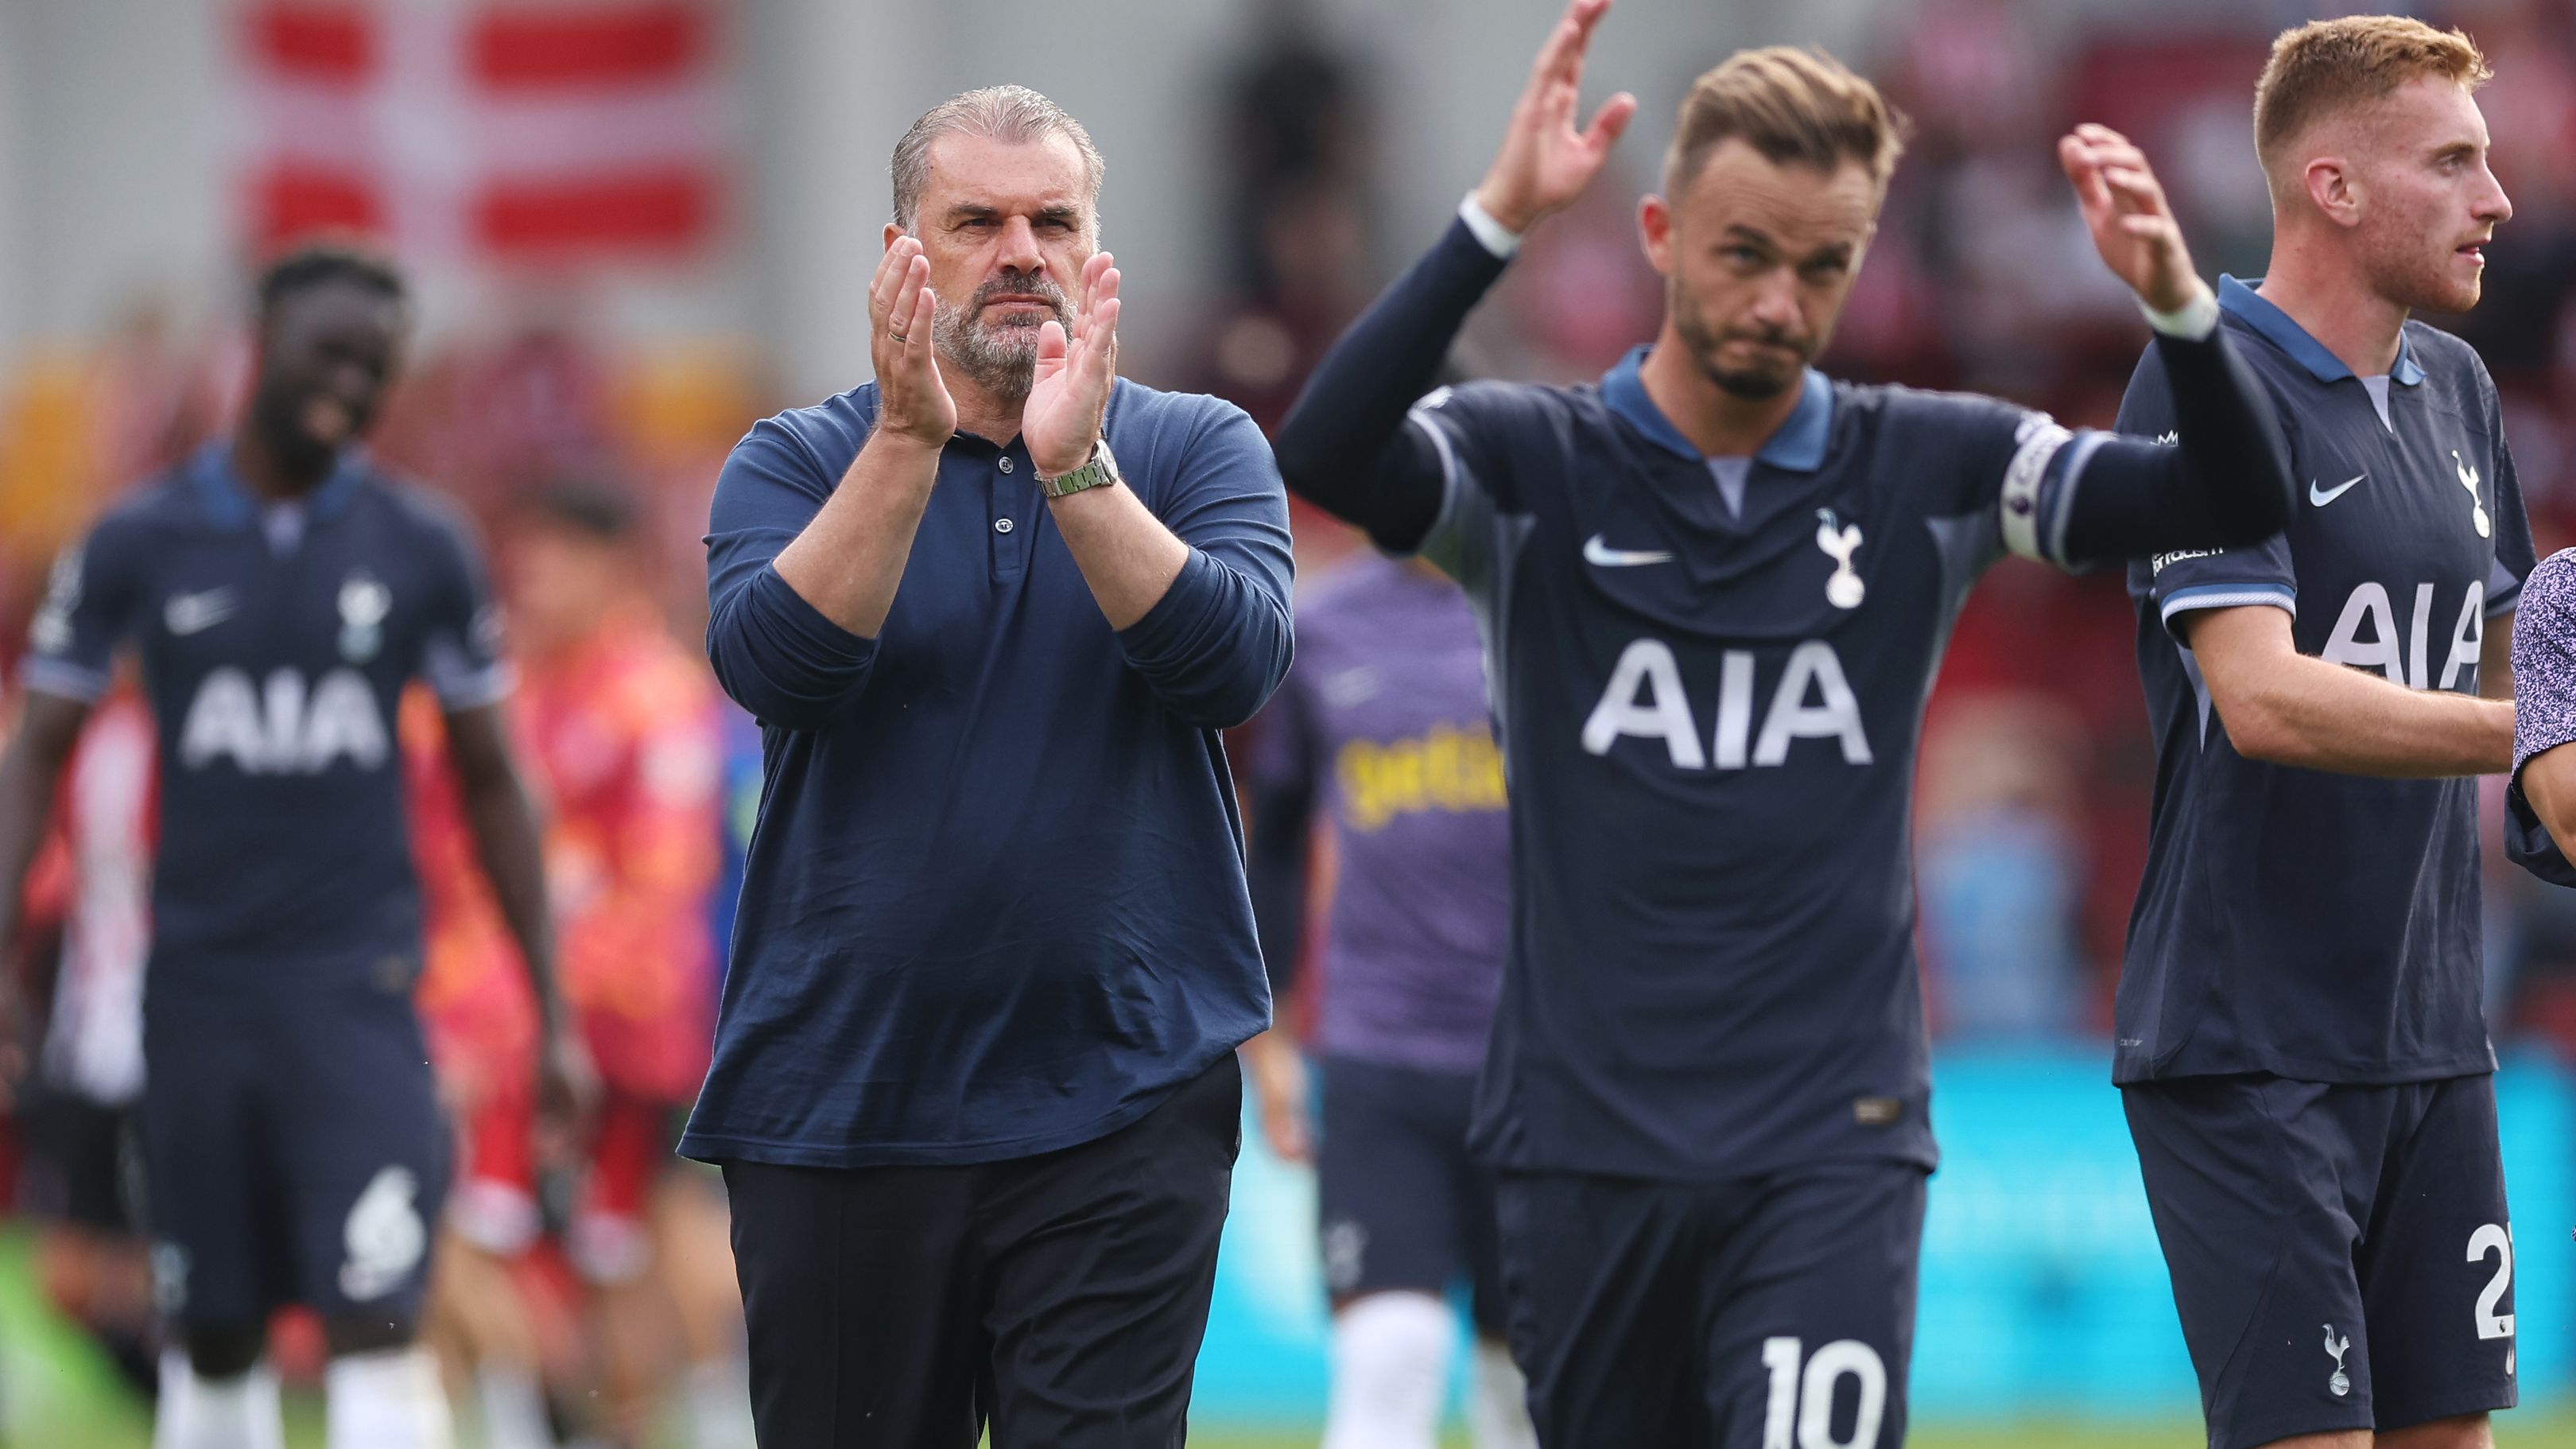 Ange Postecoglou celebrates his Premier League debut with Tottenham, which ended in a draw.